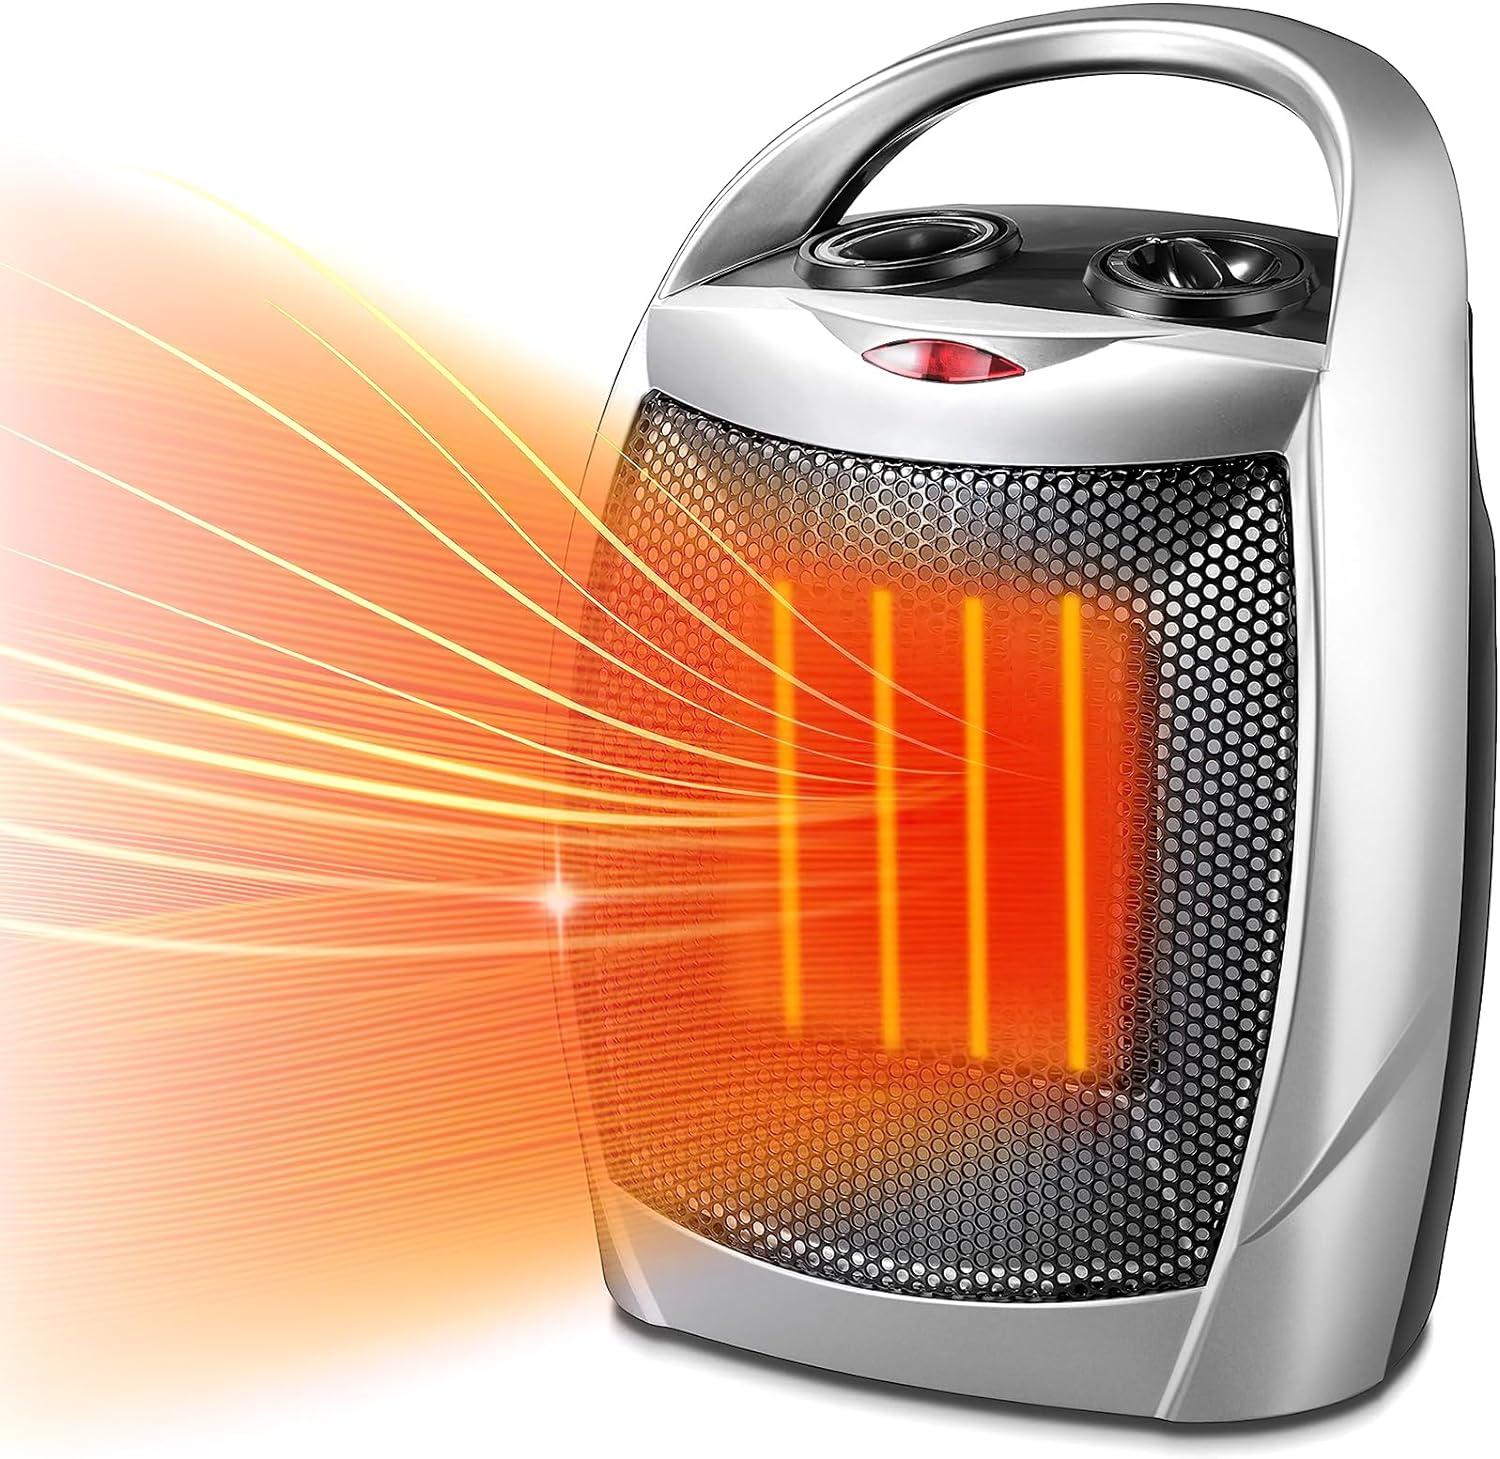 Kismile 750W Portable Electric Ceramic Space Heater for $13.54 Shipped